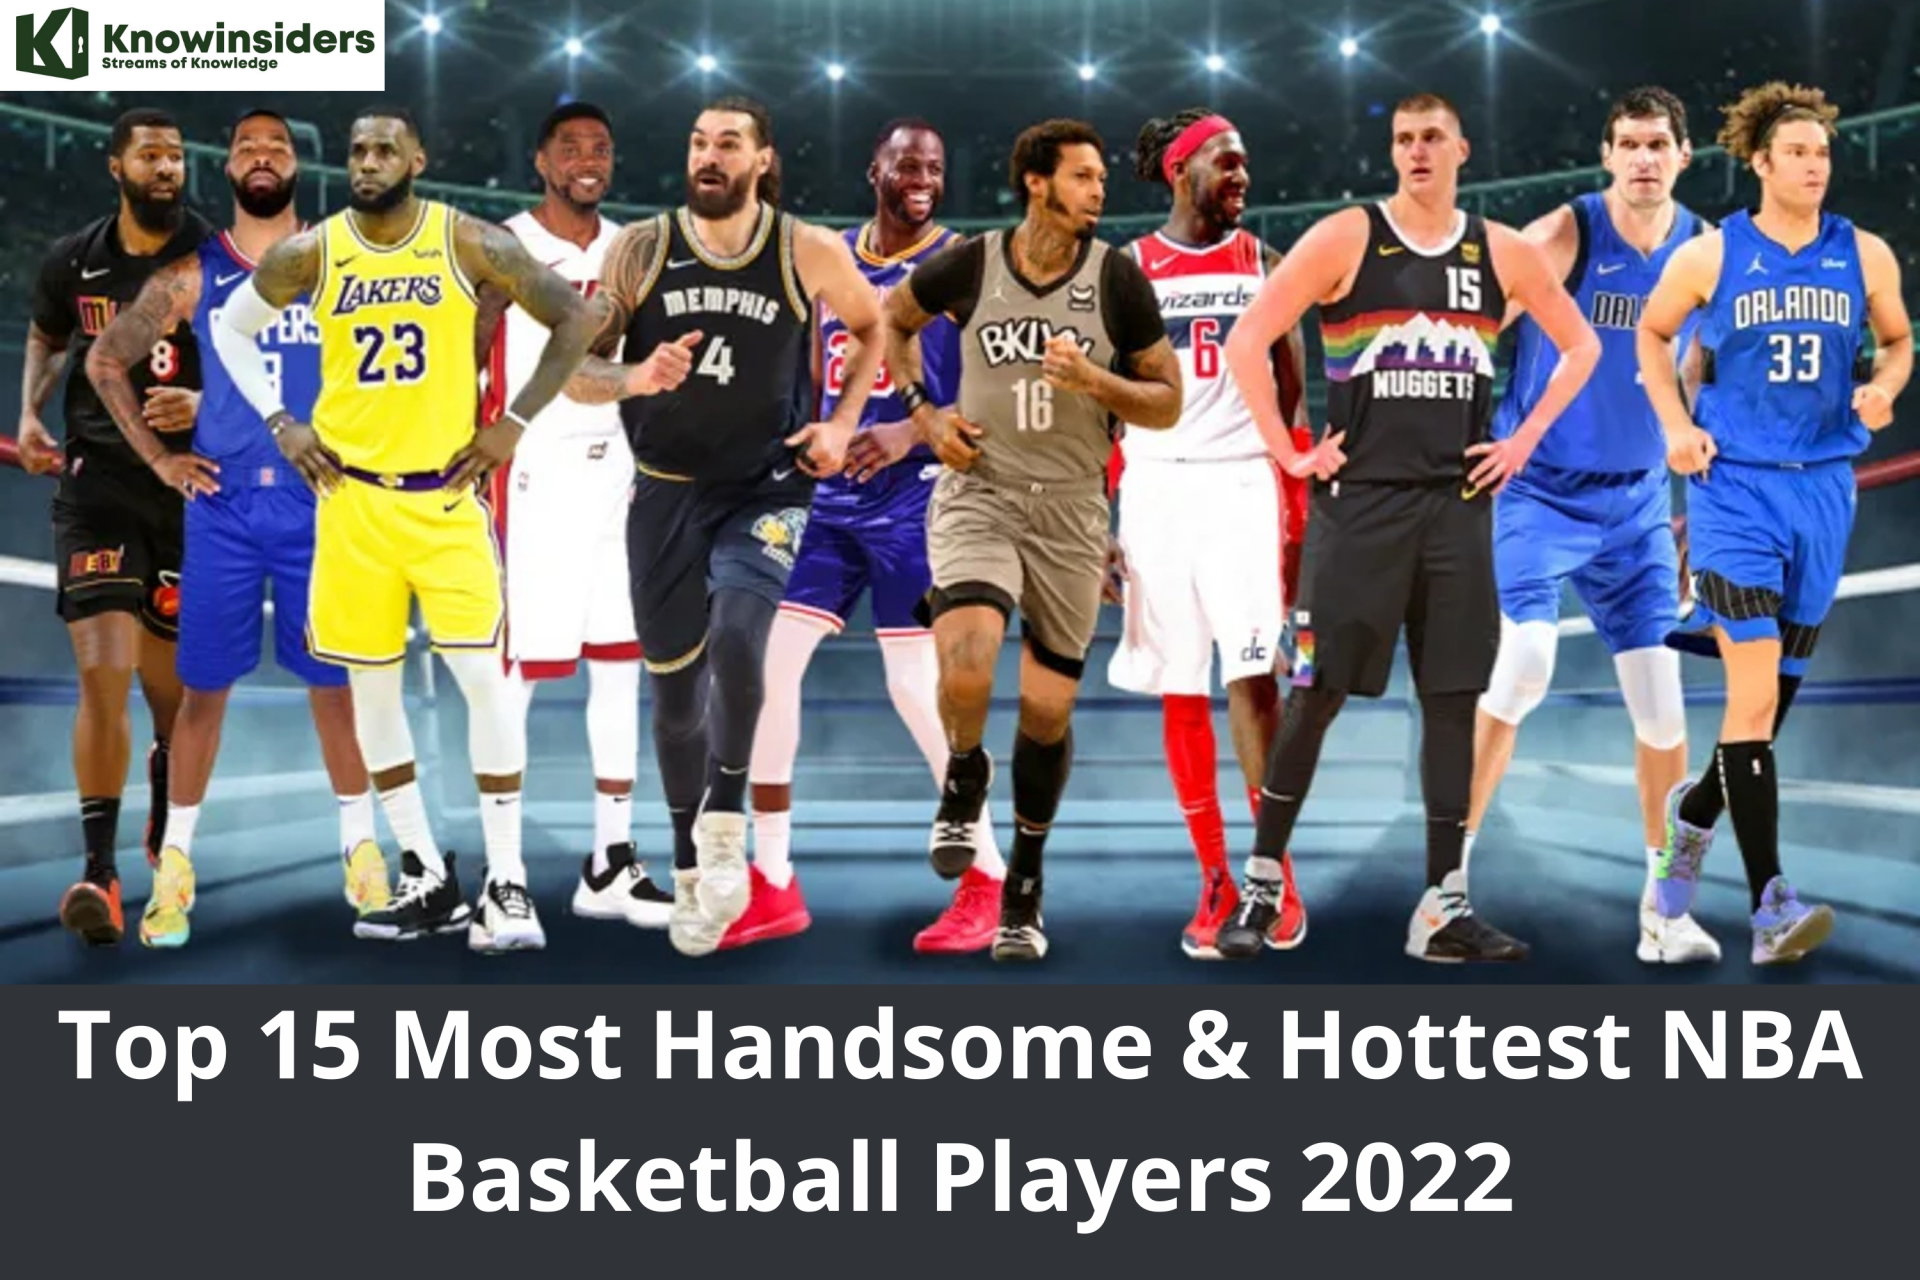 Top 15 Most Handsome & Hottest NBA Basketball Players 2022